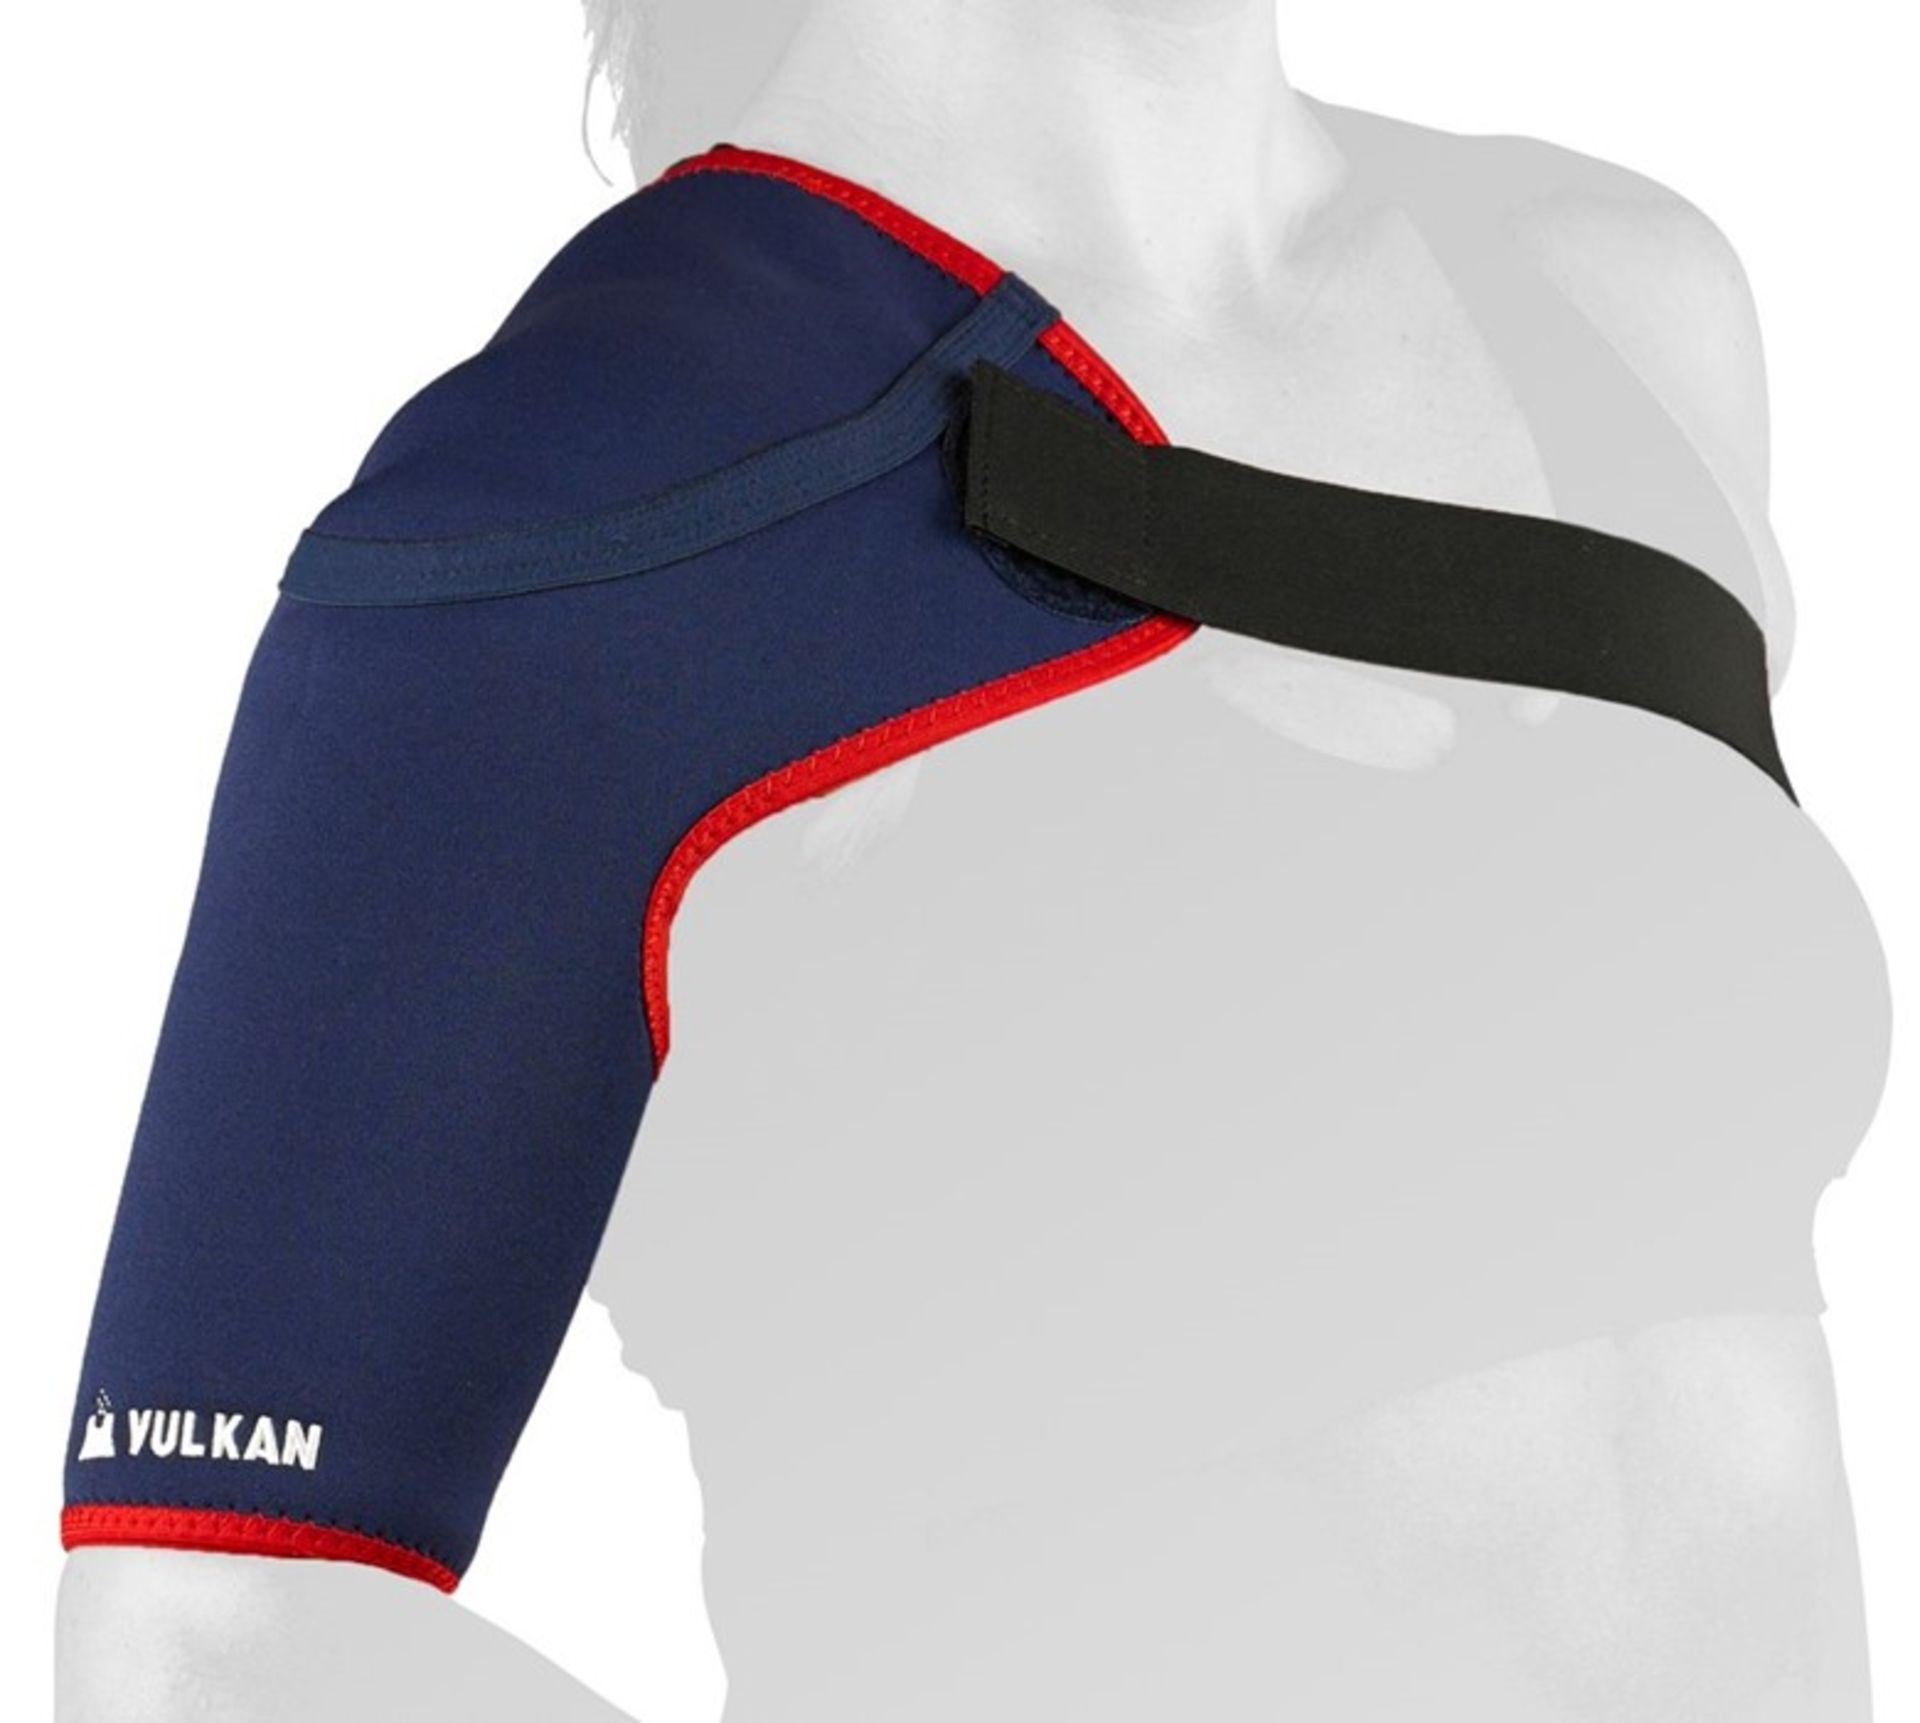 ME : 1 AS NEW BOXED VULKAN CLASSIC LARGE SHOULDER STRAP IN BLUE - FOR RIGHT SHOULDER / RRP £29.99 (